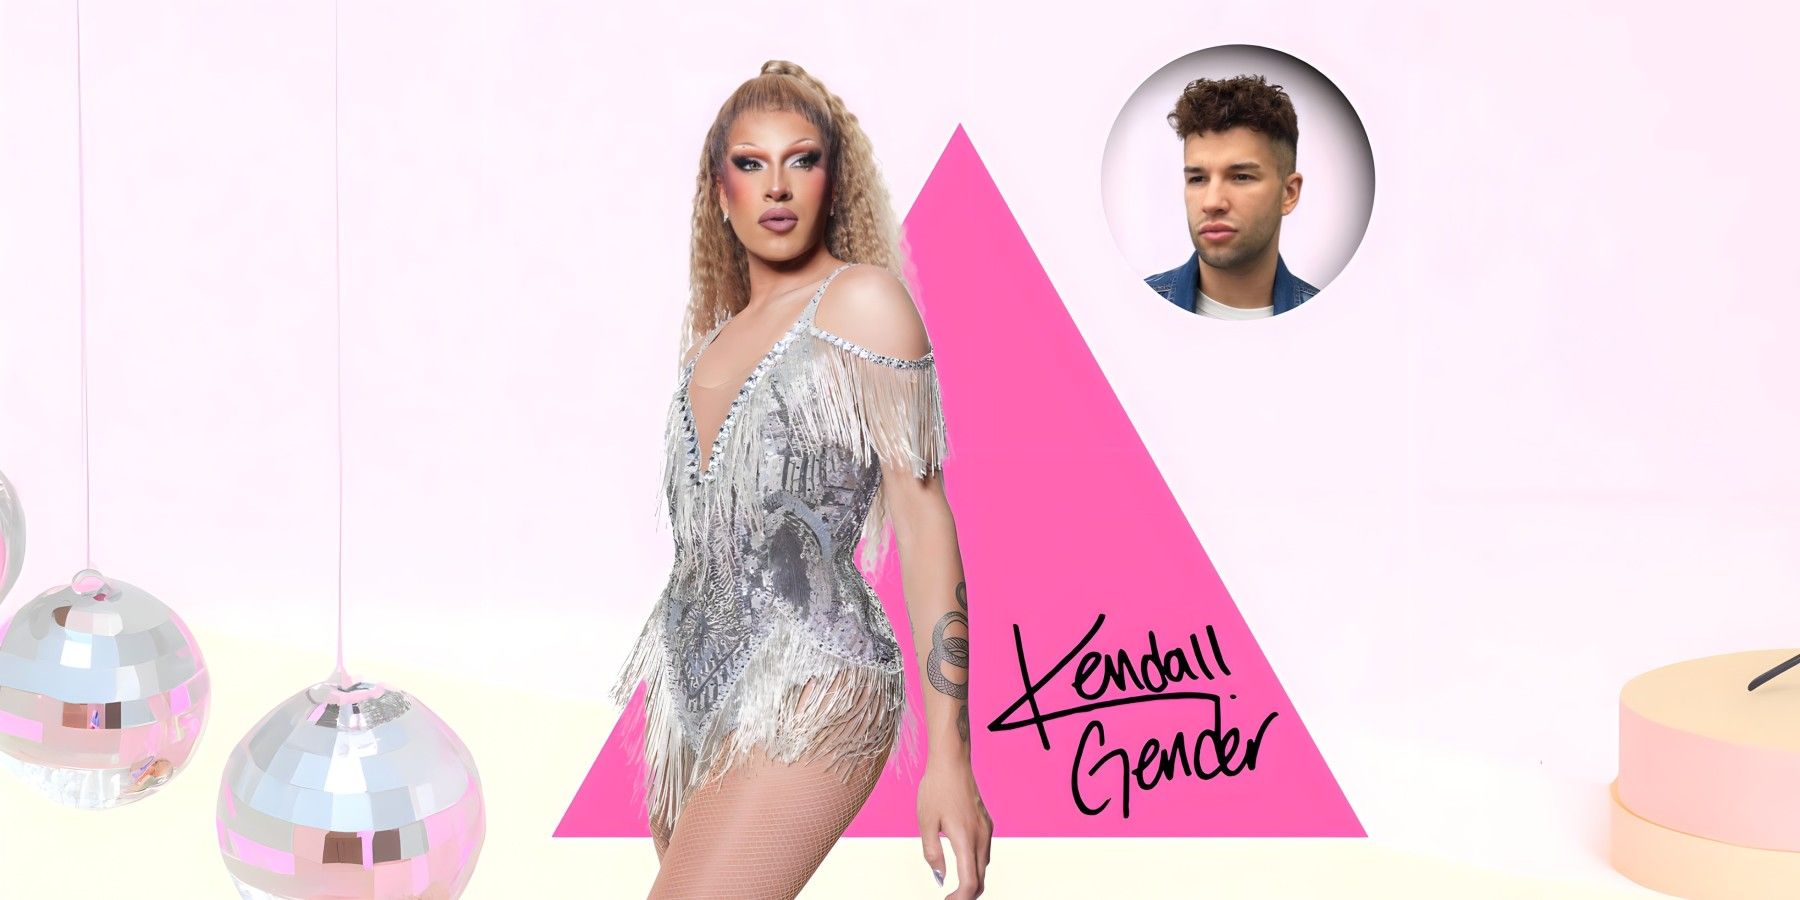 kendall gender in silver outfit canadas drag race canada vs the world CROPPED